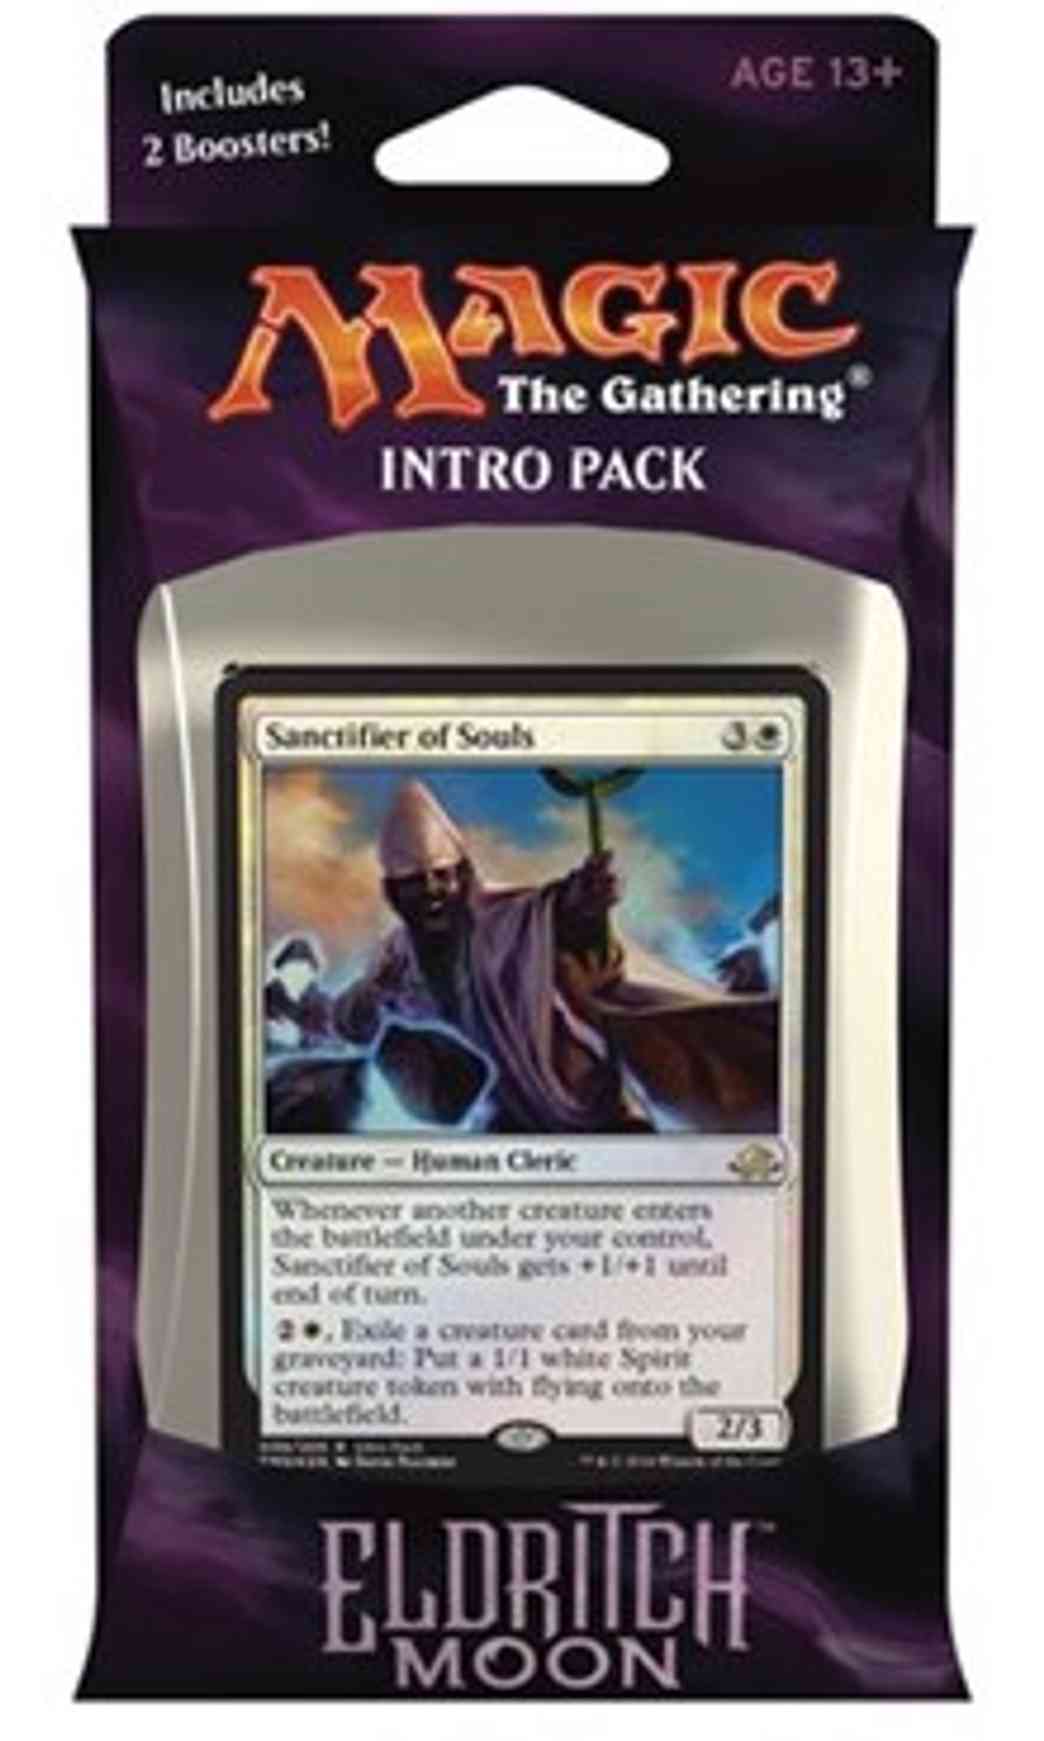 Eldritch Moon Intro Pack - White magic card front